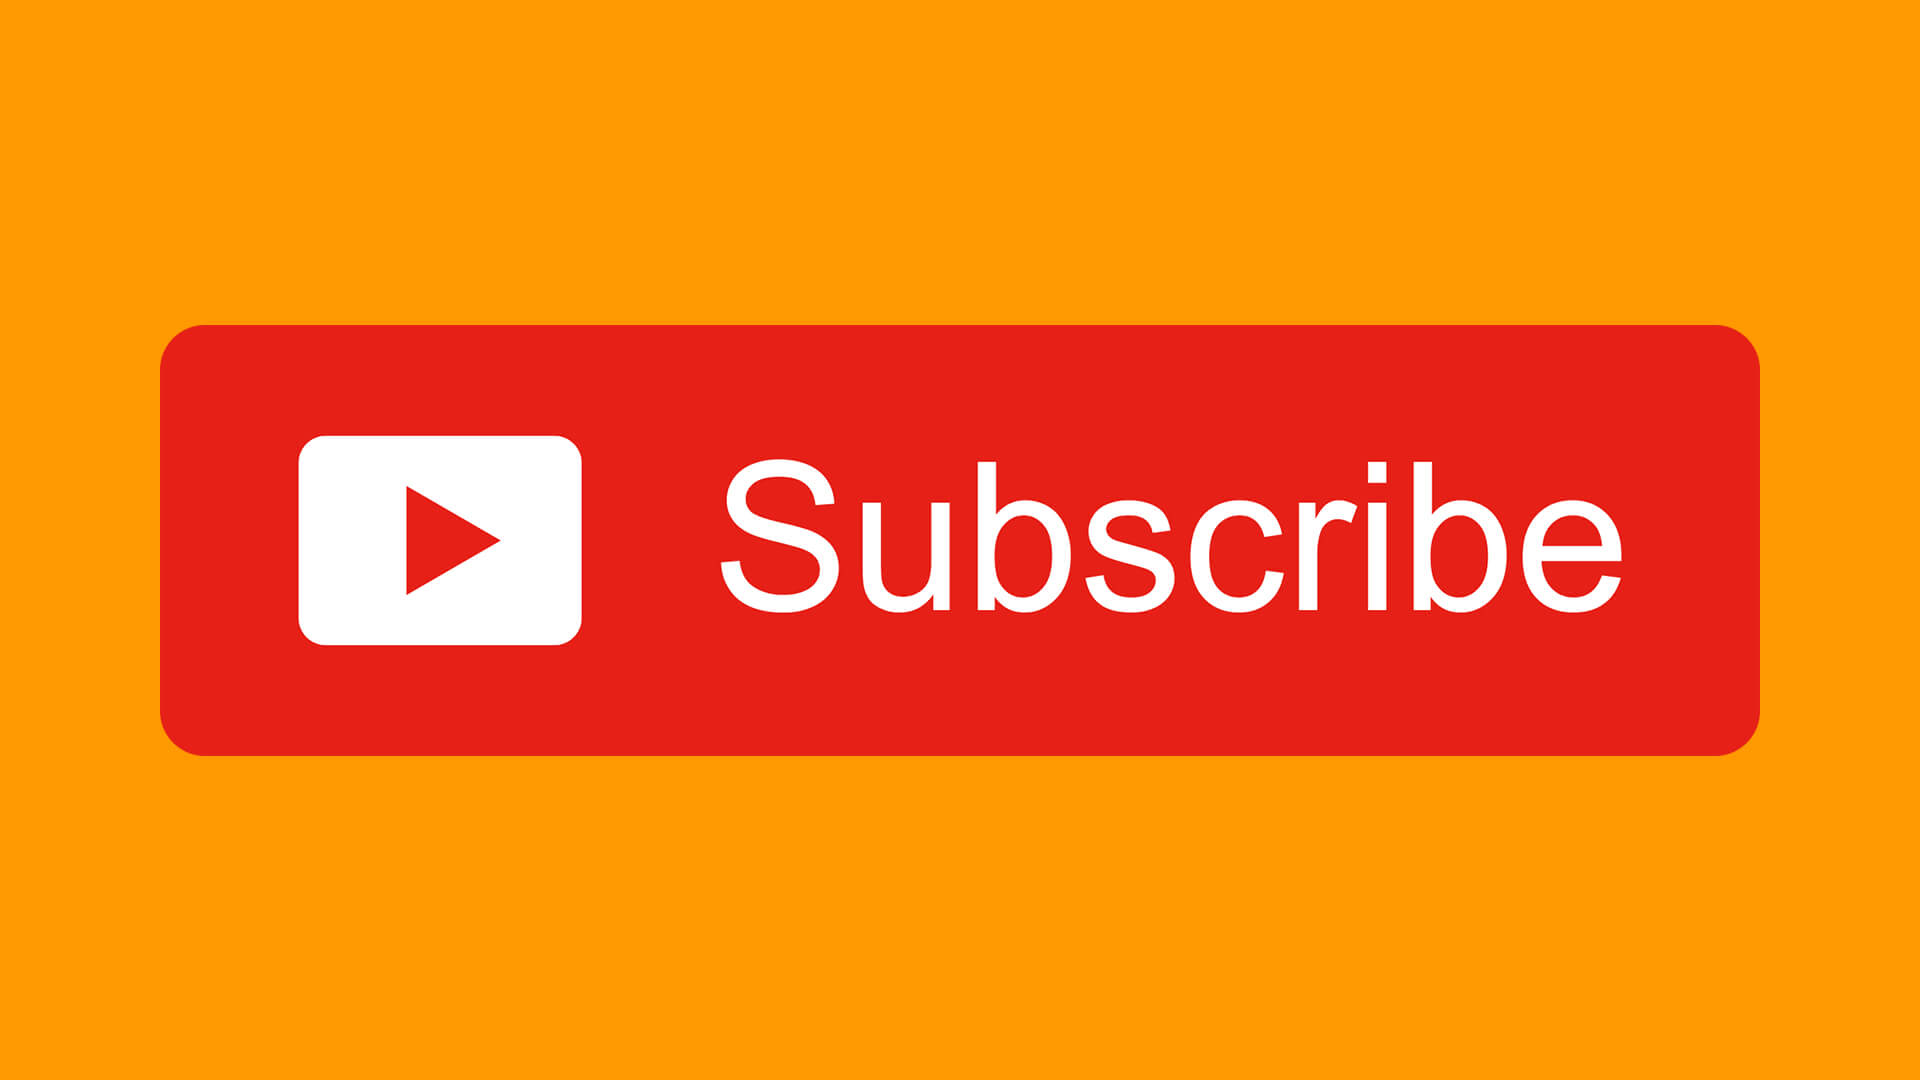 Free YouTube Subscribe Button Download Design Inspiration By AlfredoCreates 5 1